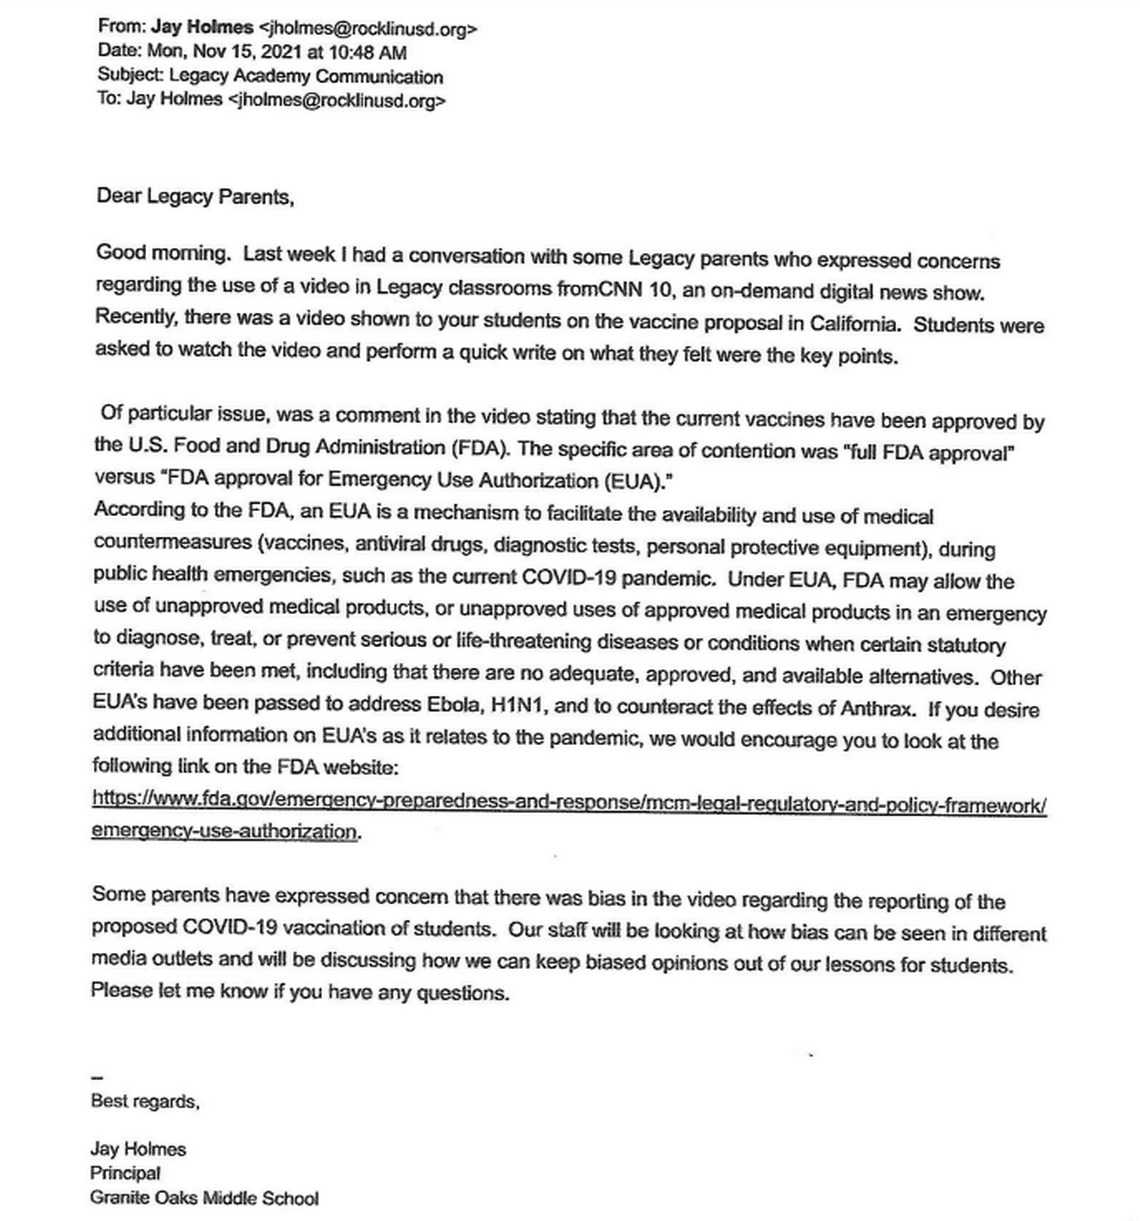 An email sent by Granite Oaks Principal Jay Holmes to parents in seventh grade teacher Katie Ragan’s class. Holmes sent this letter in response to a parent’s concern that a video clip shown in class was biased despite acknowledging that the clip “presented both sides of the argument.”